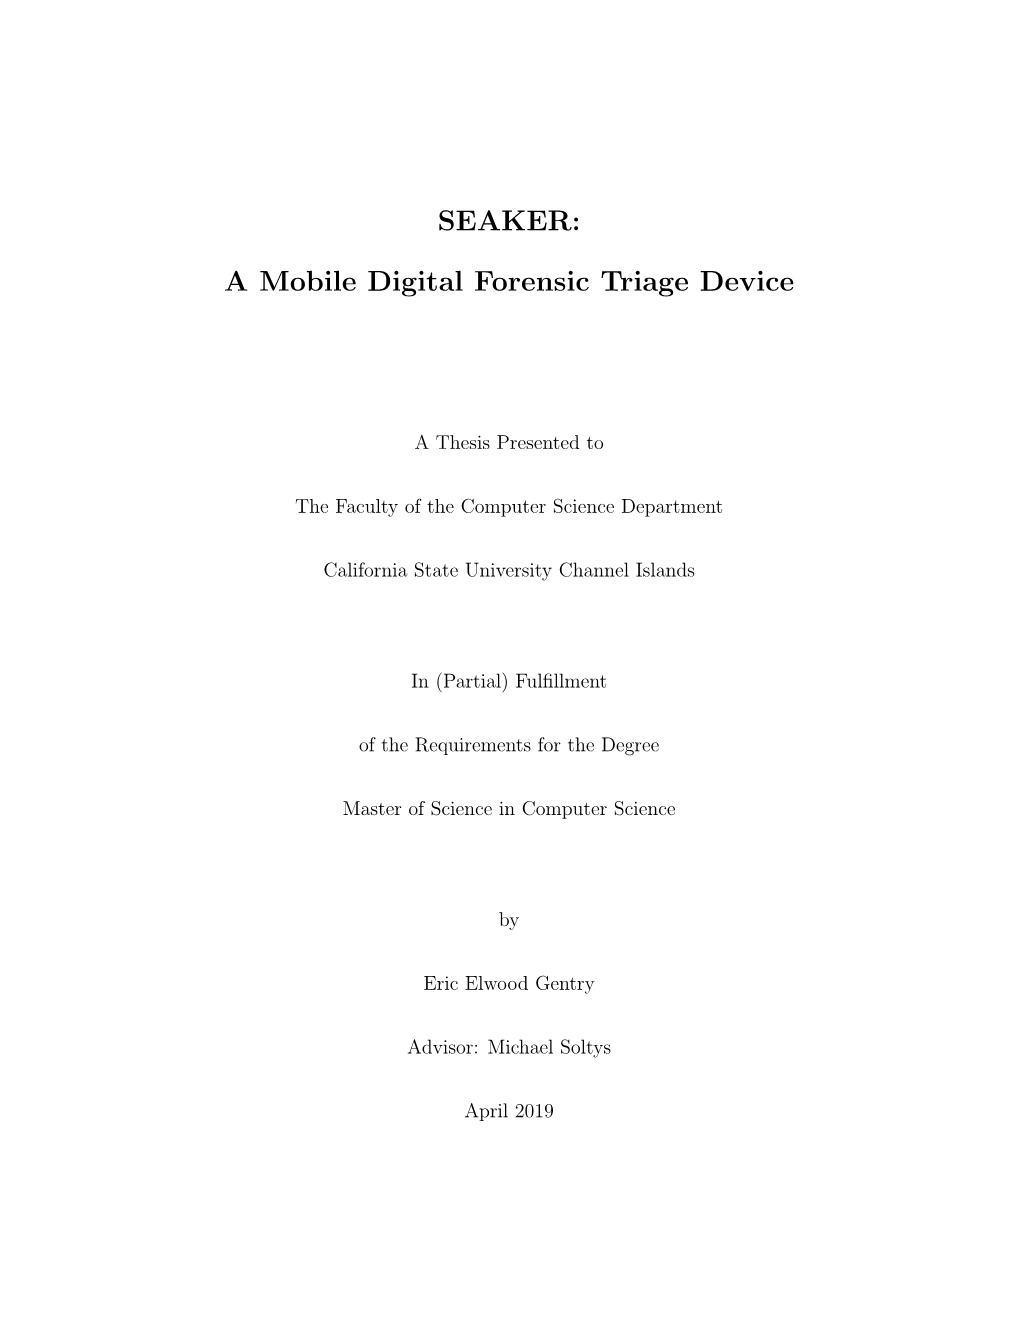 SEAKER: a Mobile Digital Forensic Triage Device